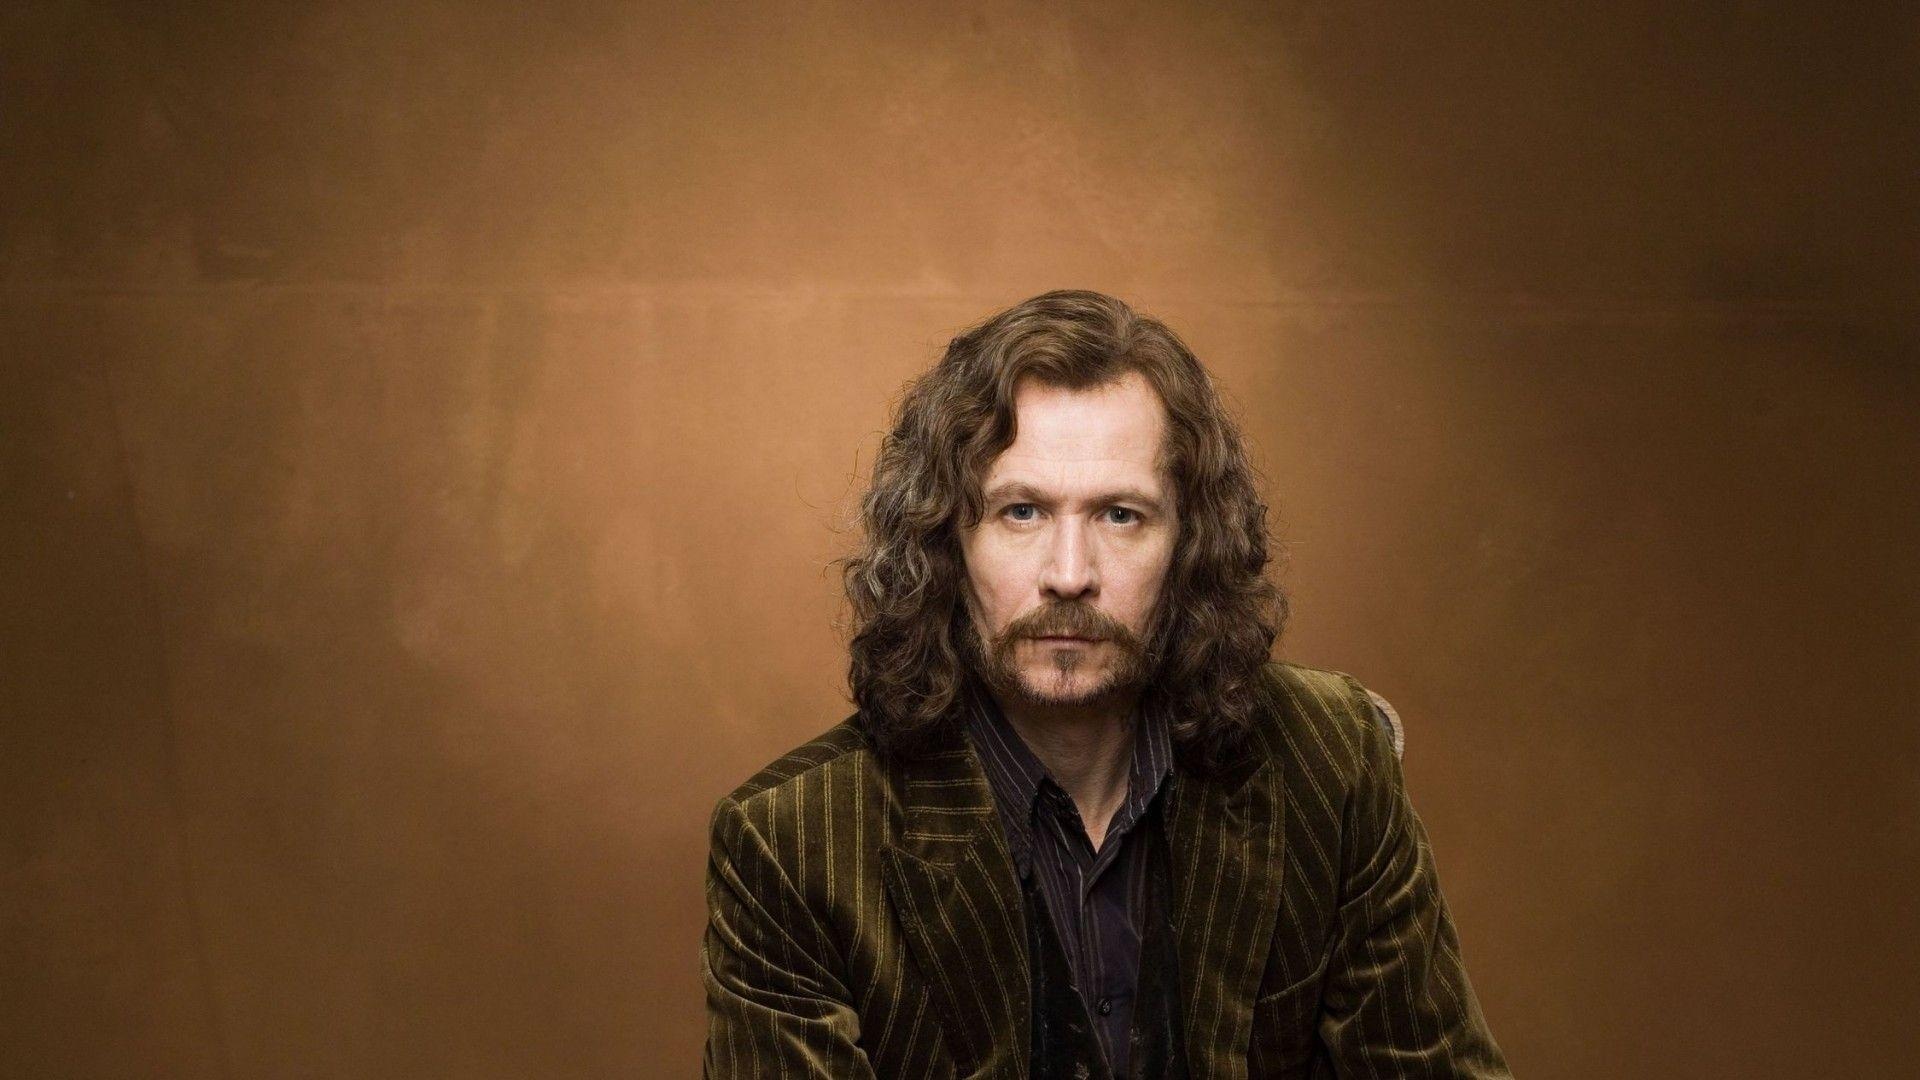 Sirius Black: Was best friends with James Potter, Remus Lupin, and Peter Pettigrew. 1920x1080 Full HD Background.